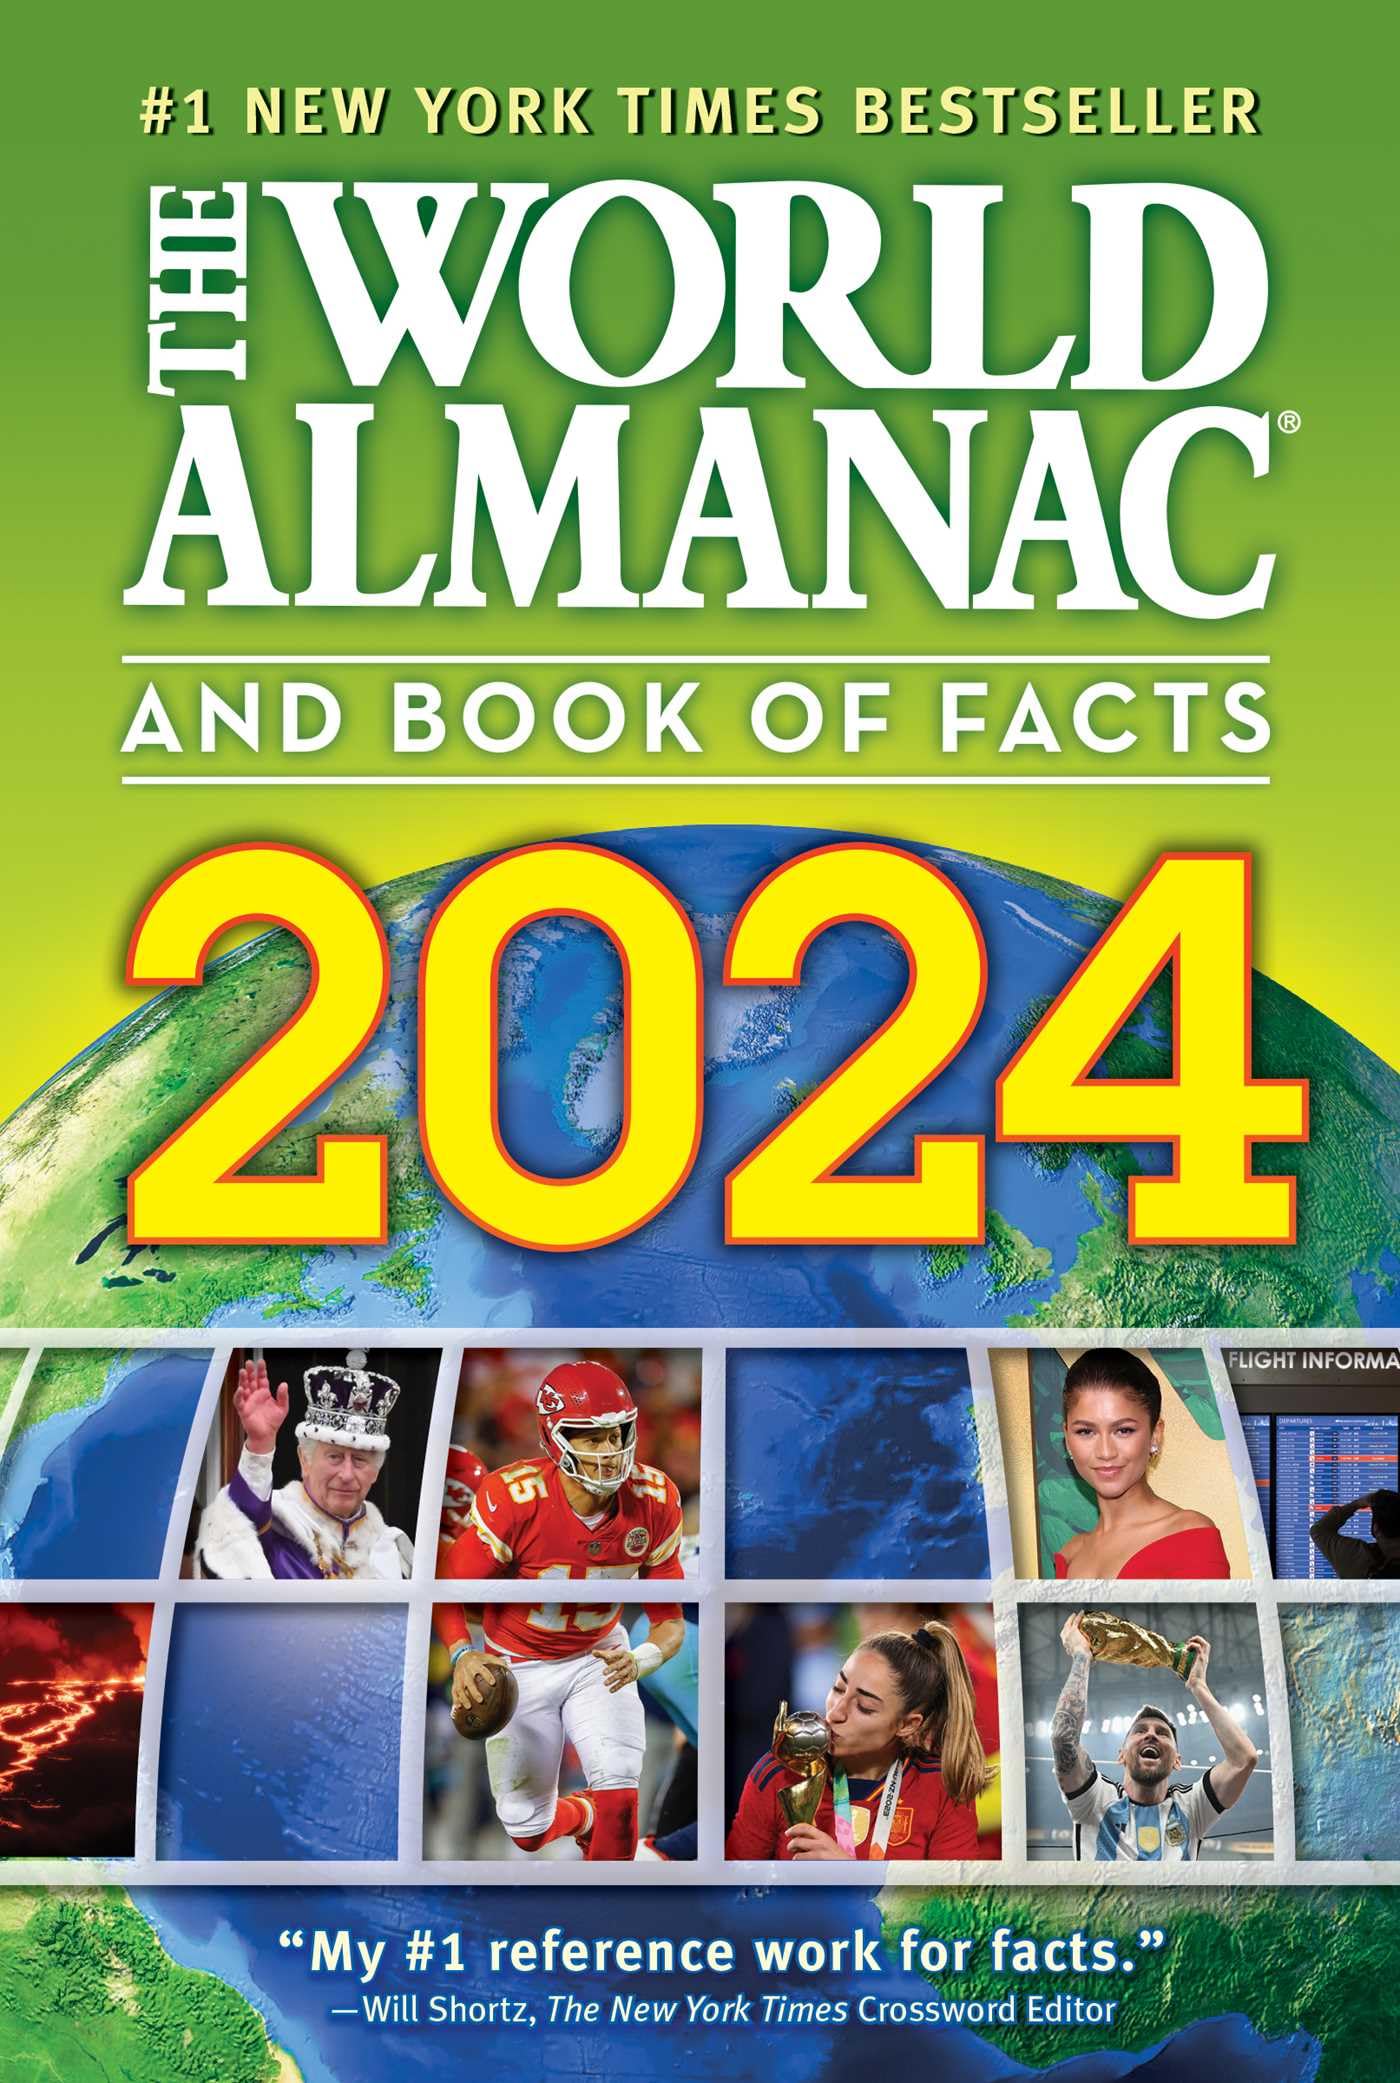 The World Almanac and Book of Facts 2024 by Janssen, Sarah